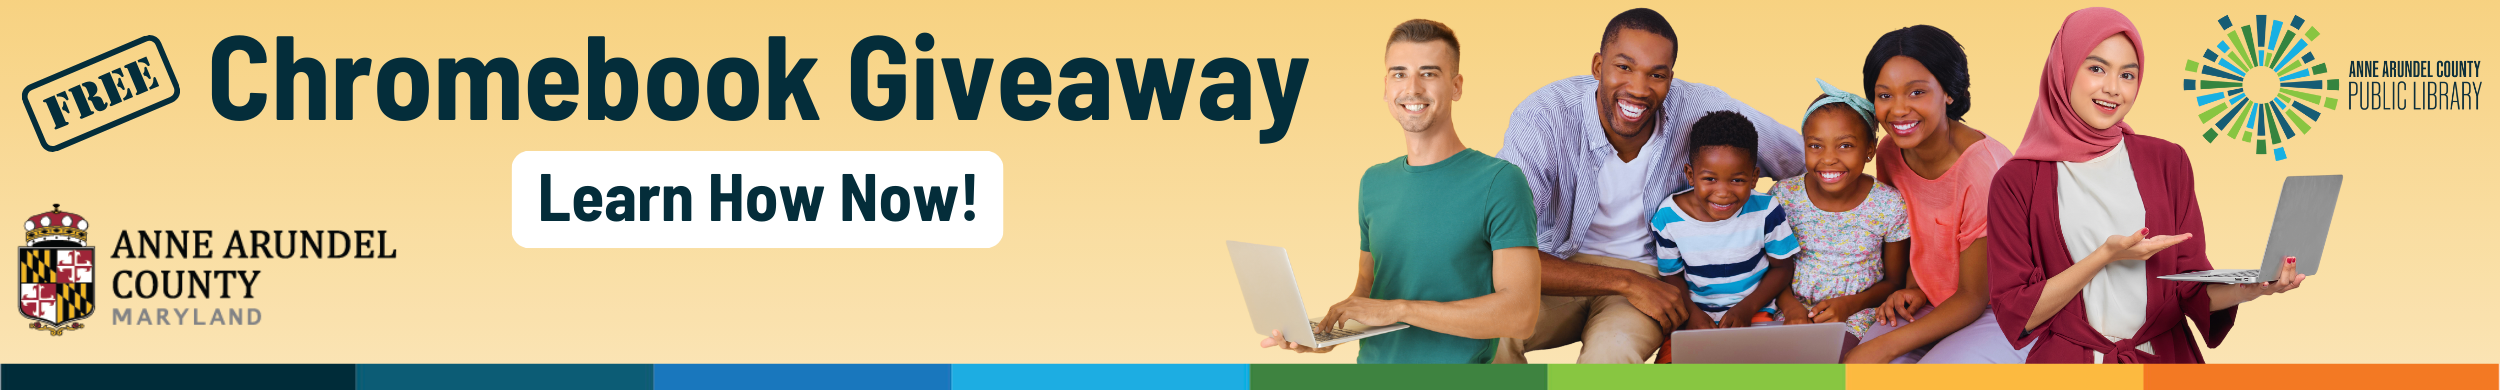 Connected Devices Chromebook Giveaway 